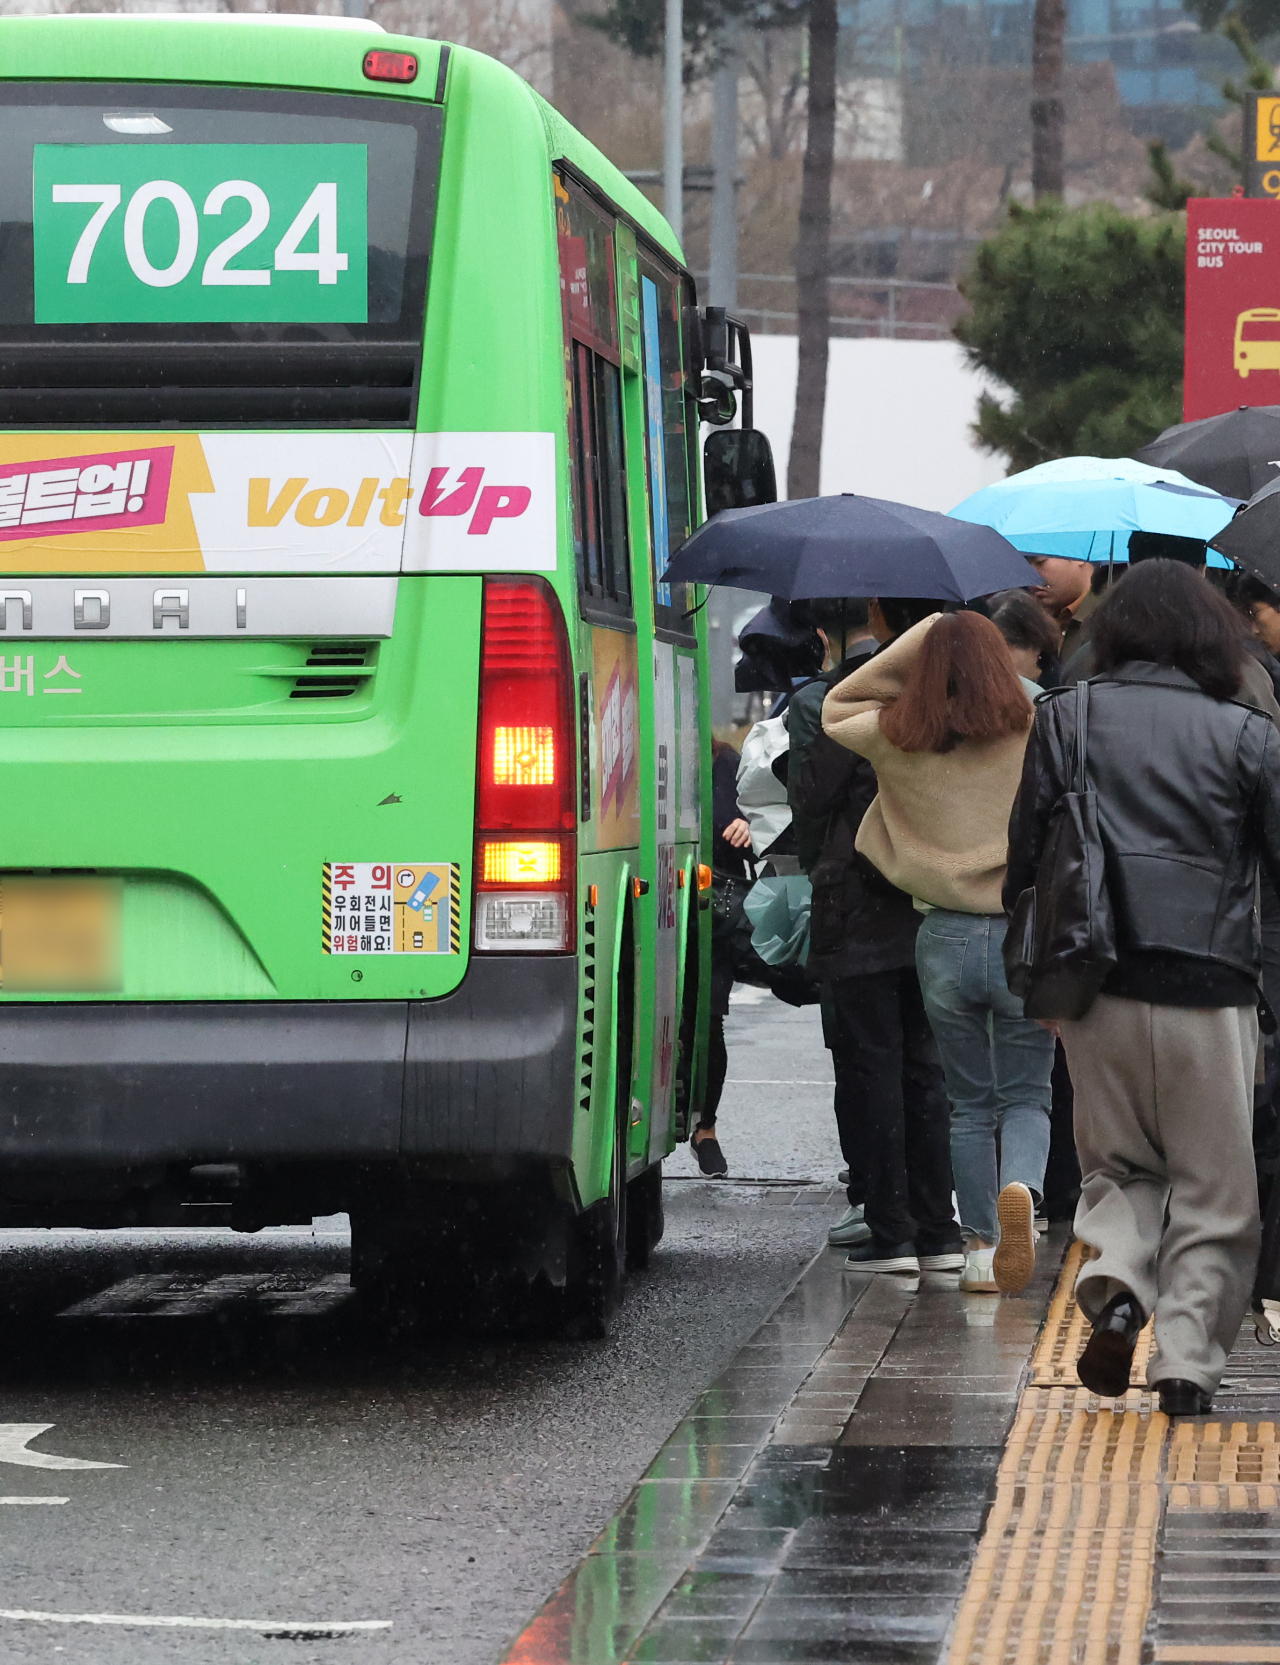 People board a No. 7024 bus at a stop near Seoul Station on Thursday. No. 7024 is one of the few operational buses amid the citywide strike of unionized bus drivers. (Yonhap)